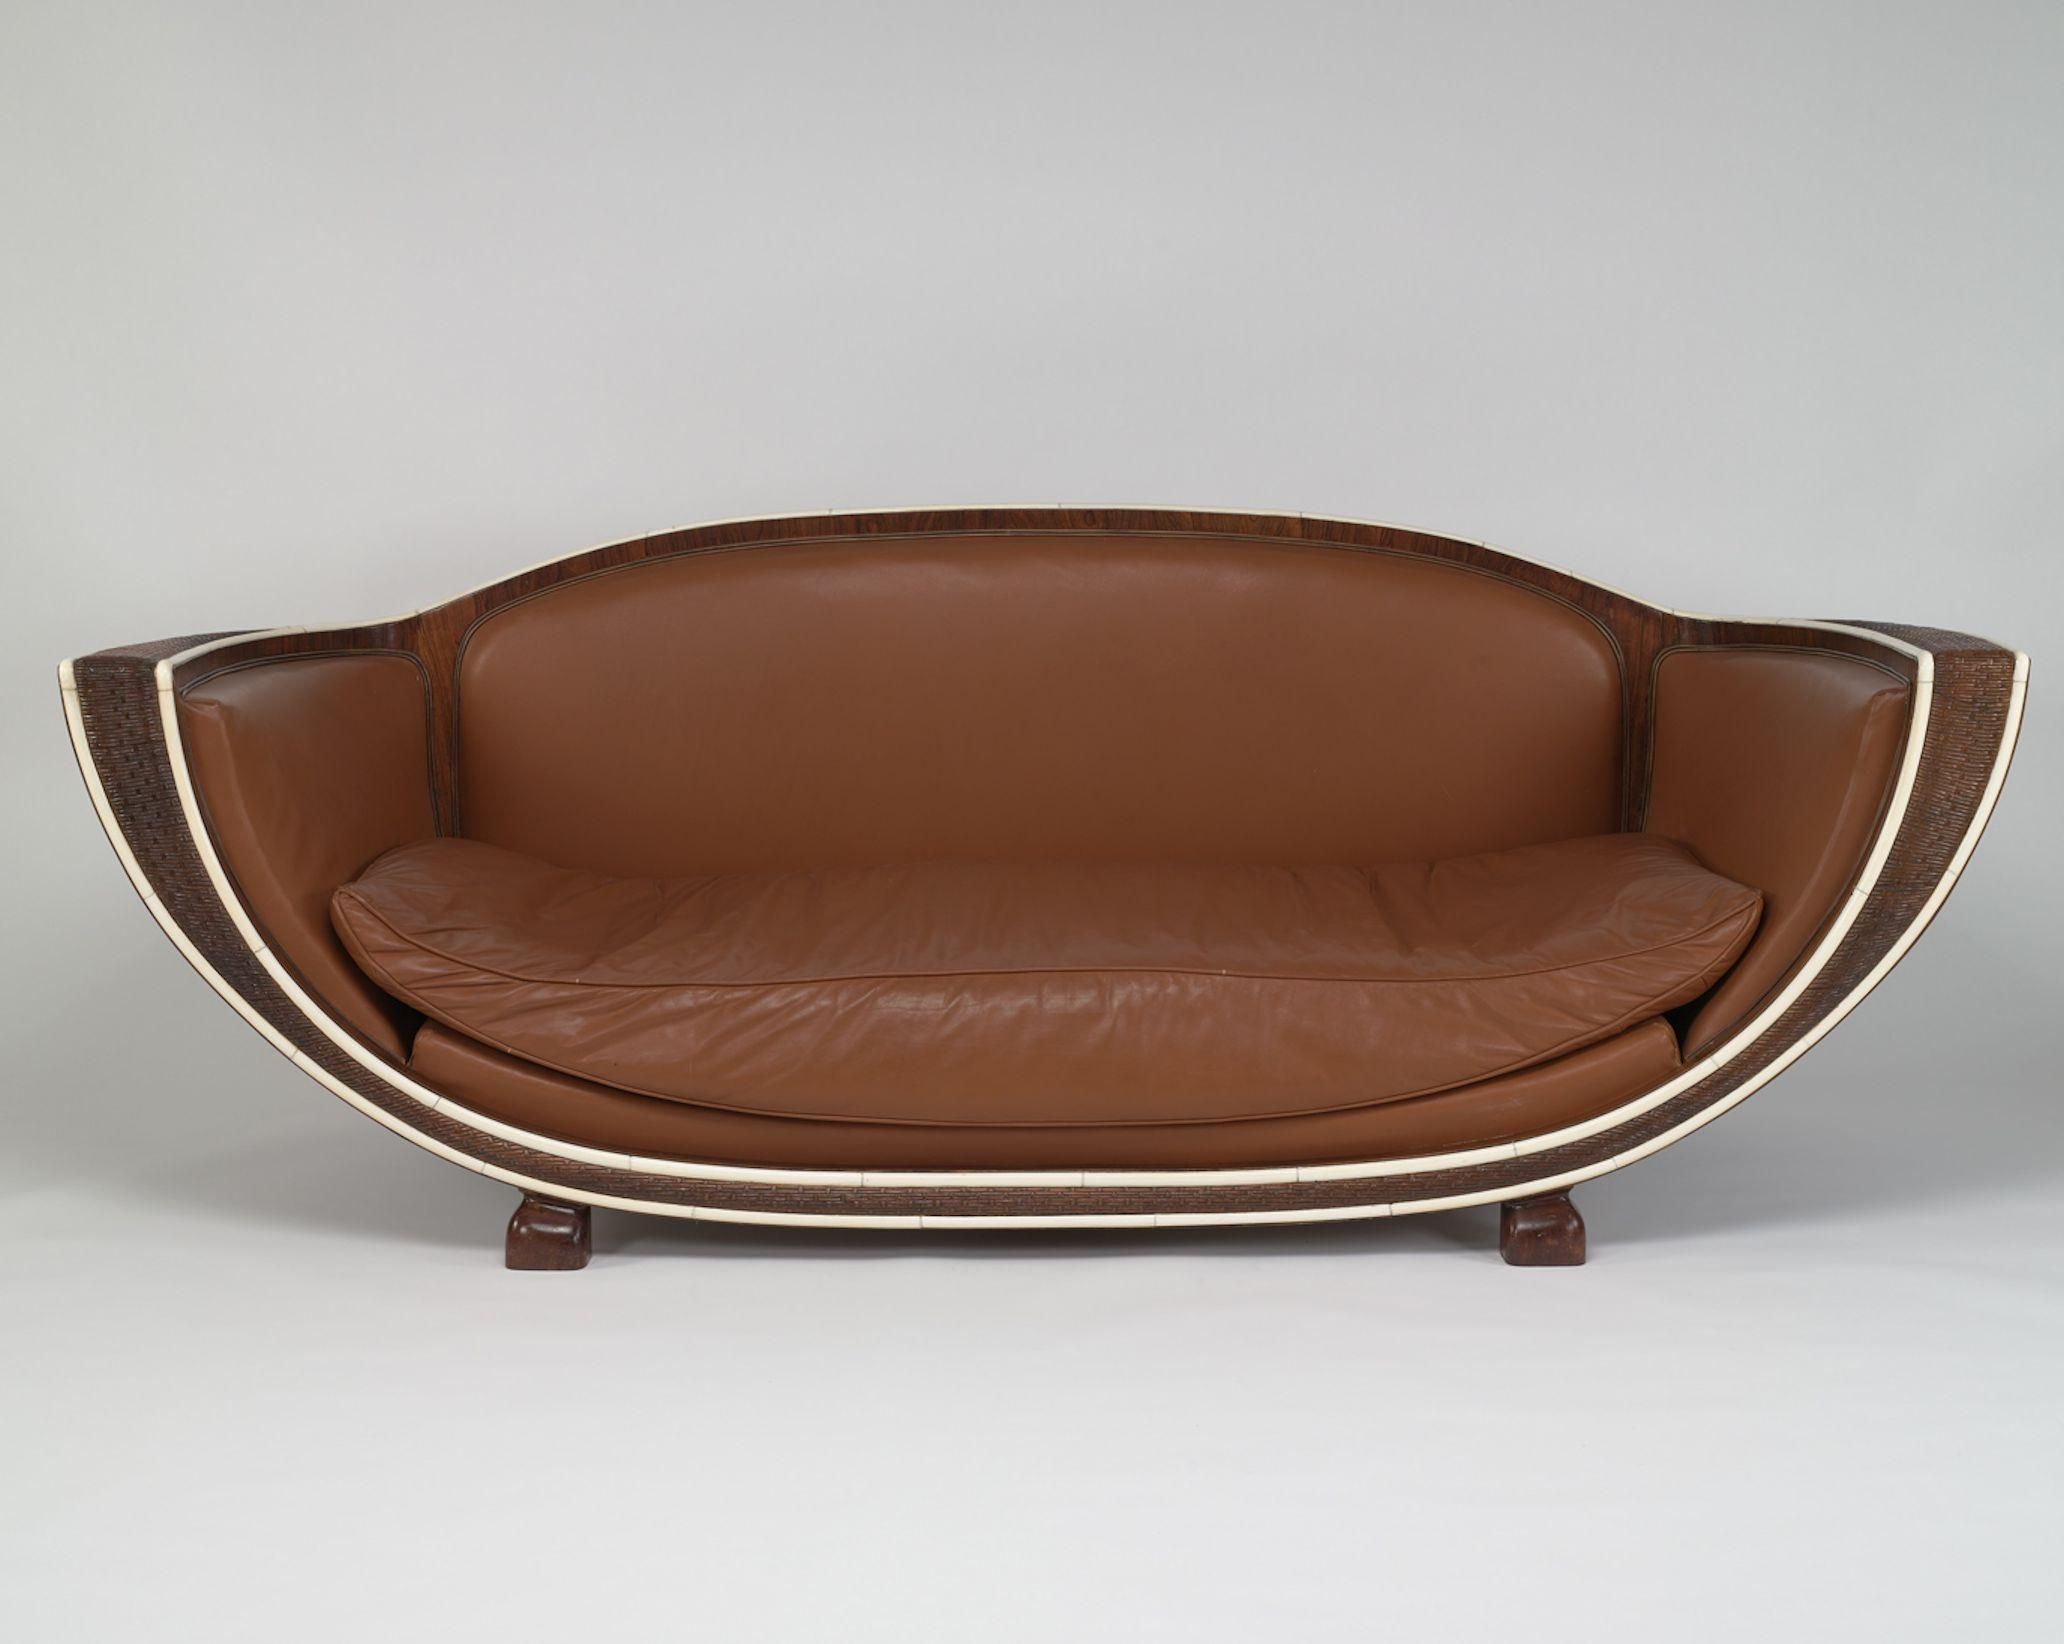 Sofas Center : Image 200 Dreaded Art Deco Sofa Picture Throughout Art Deco Sofa And Chairs (View 20 of 20)